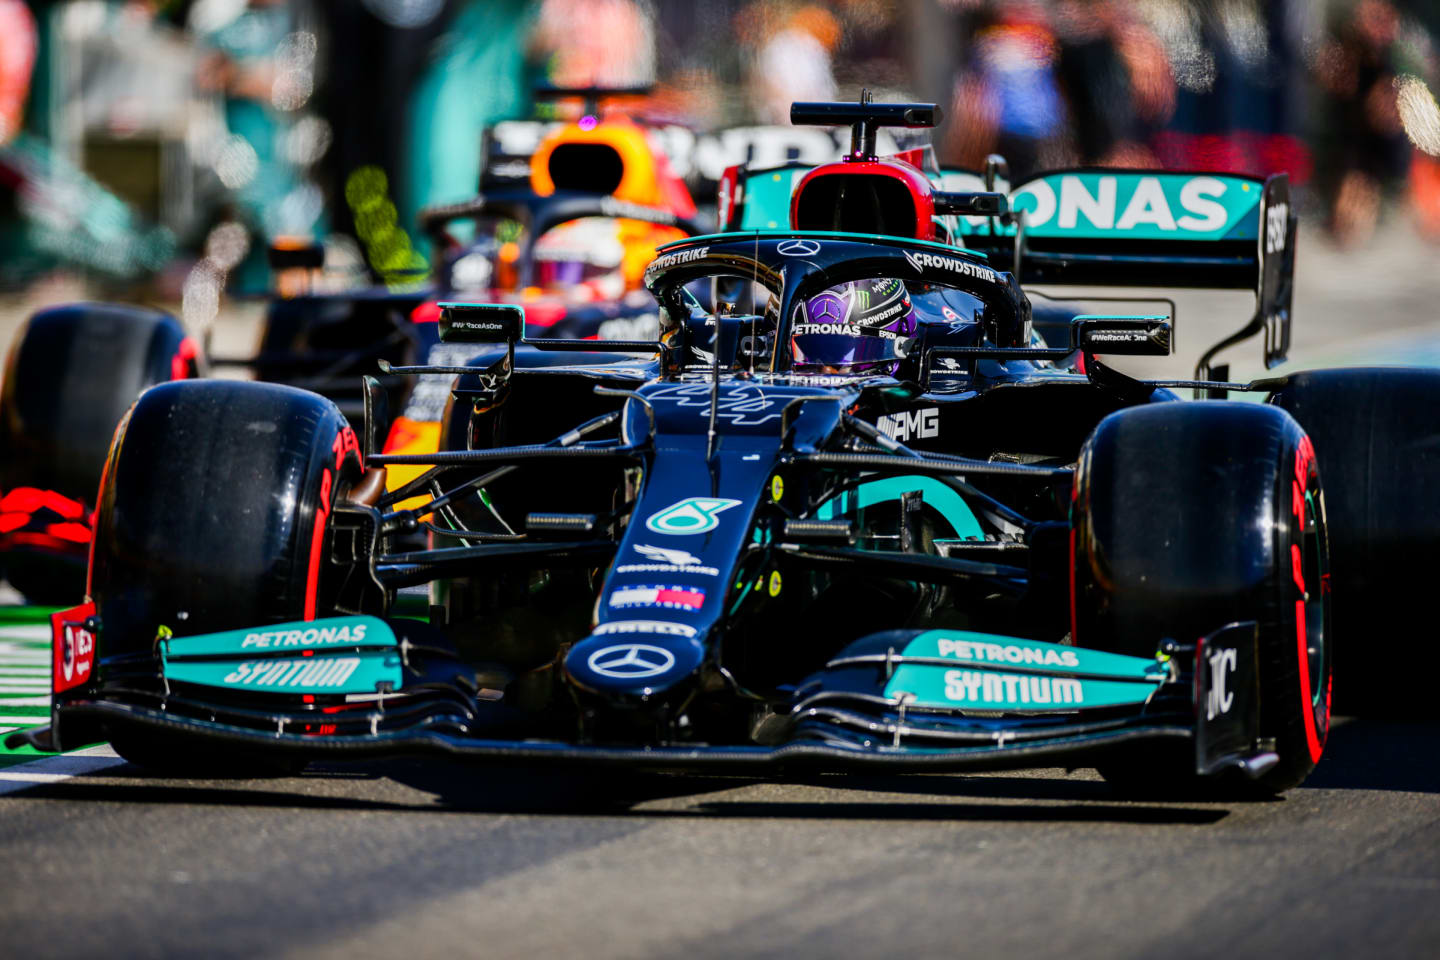 BUDAPEST, HUNGARY - JULY 31: Lewis Hamilton of Mercedes and Great Britain leads Max Verstappen of